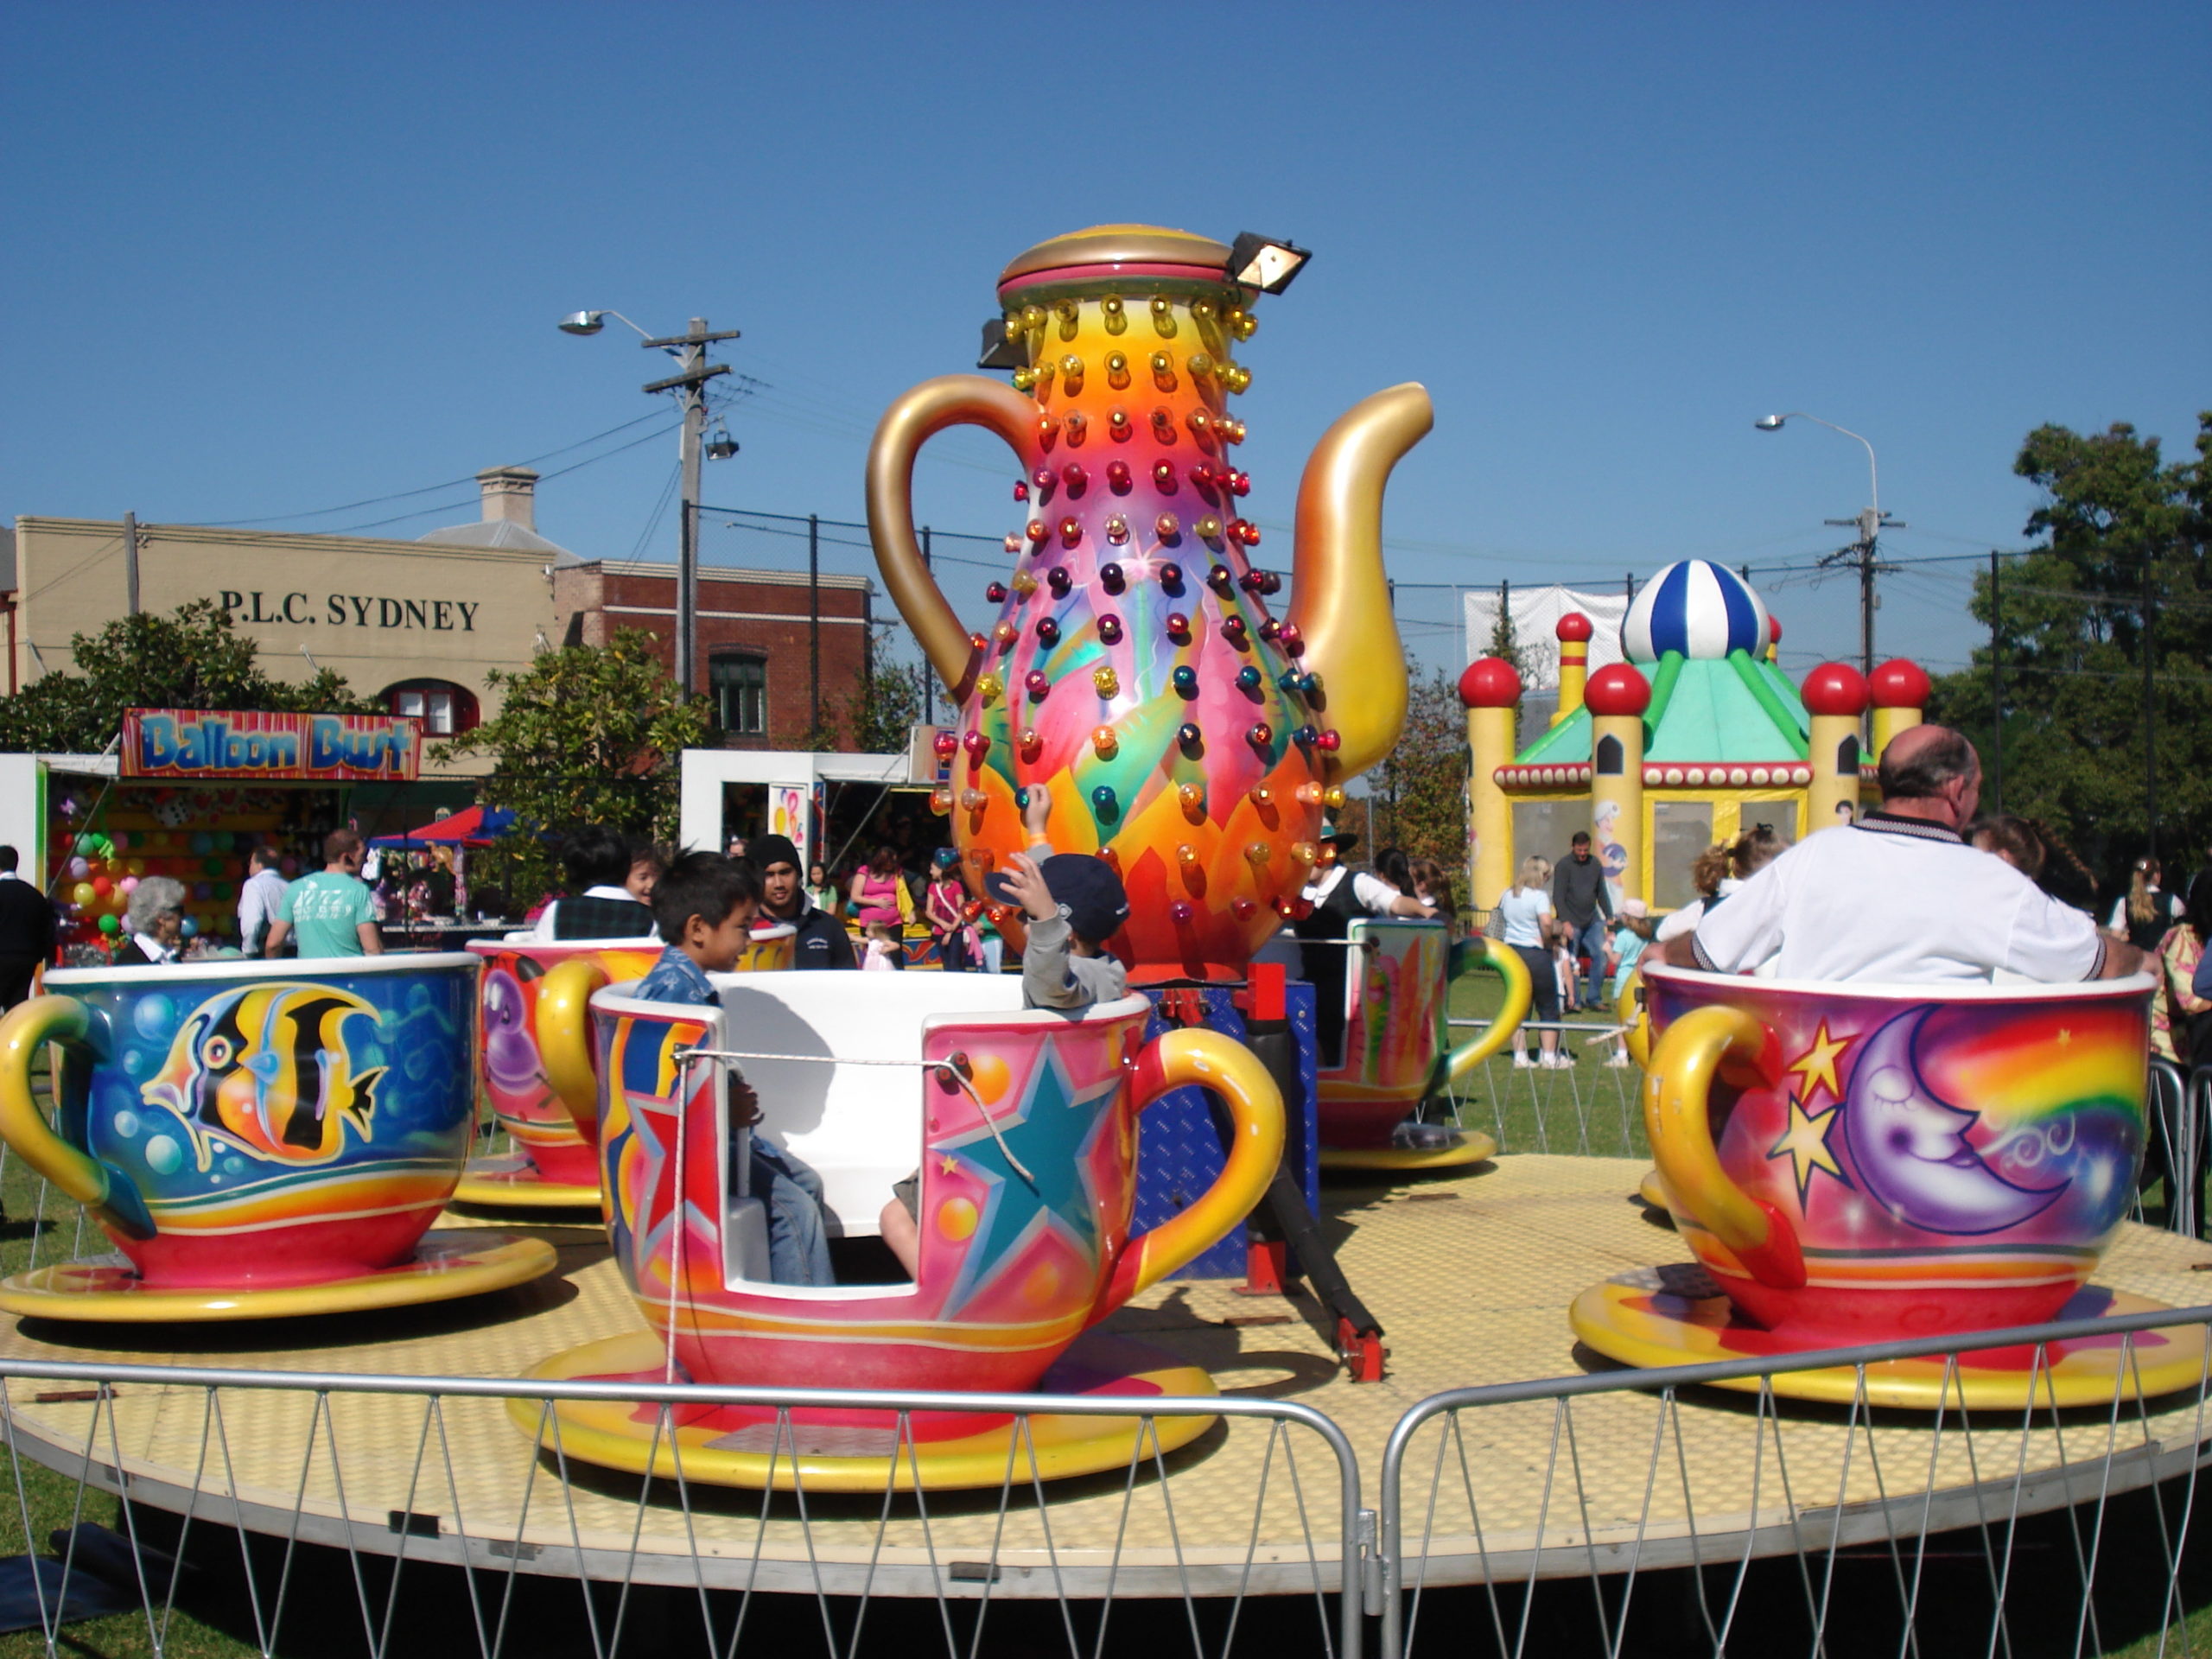 Tea Cup and Saucer carnival ride